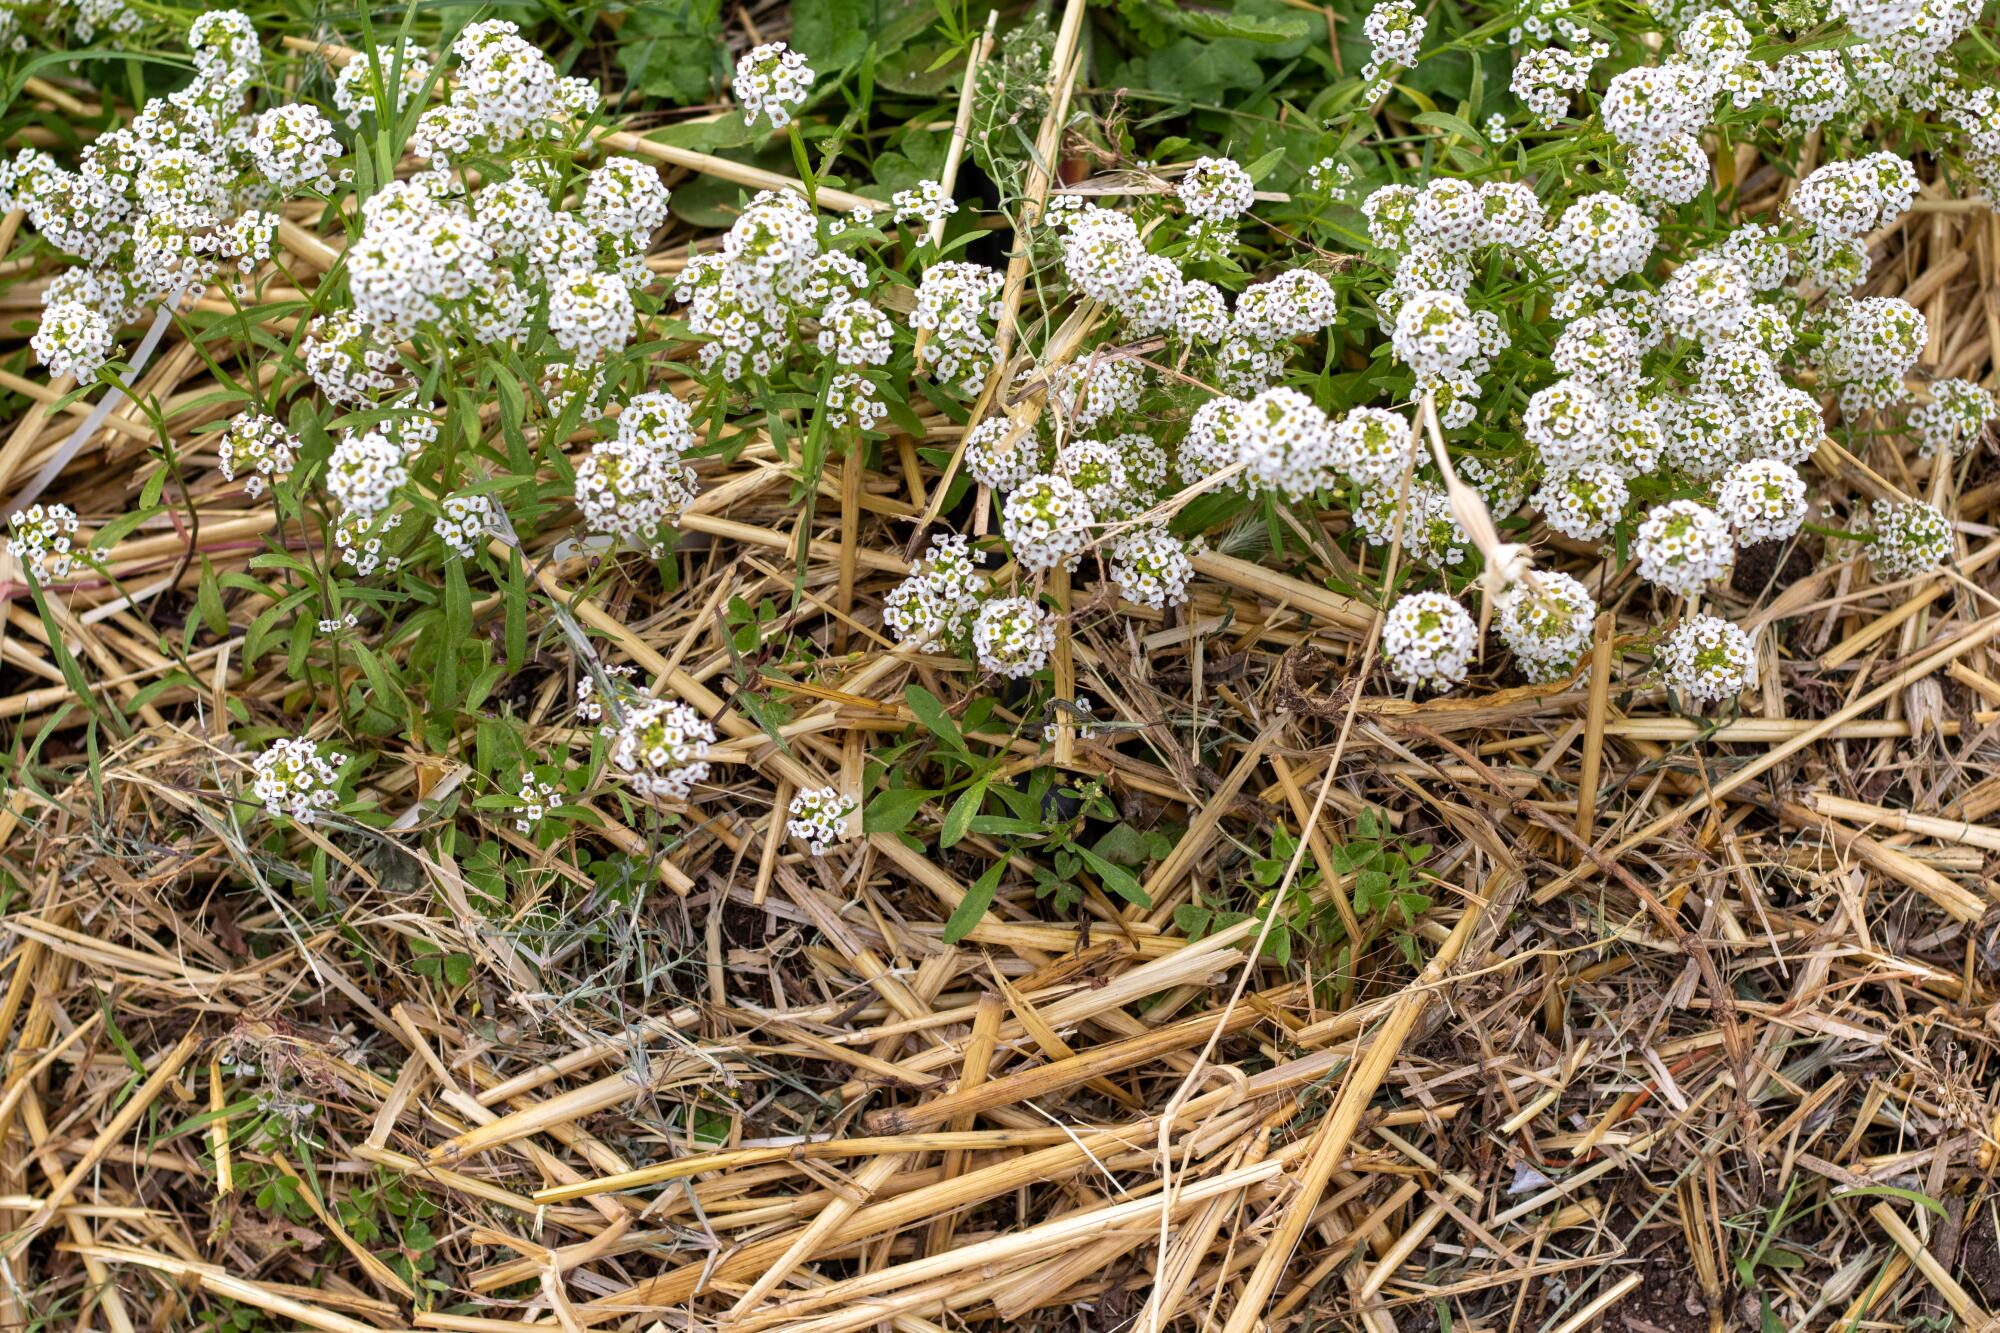 Nafis plants sweet alyssum to help manage aphids.